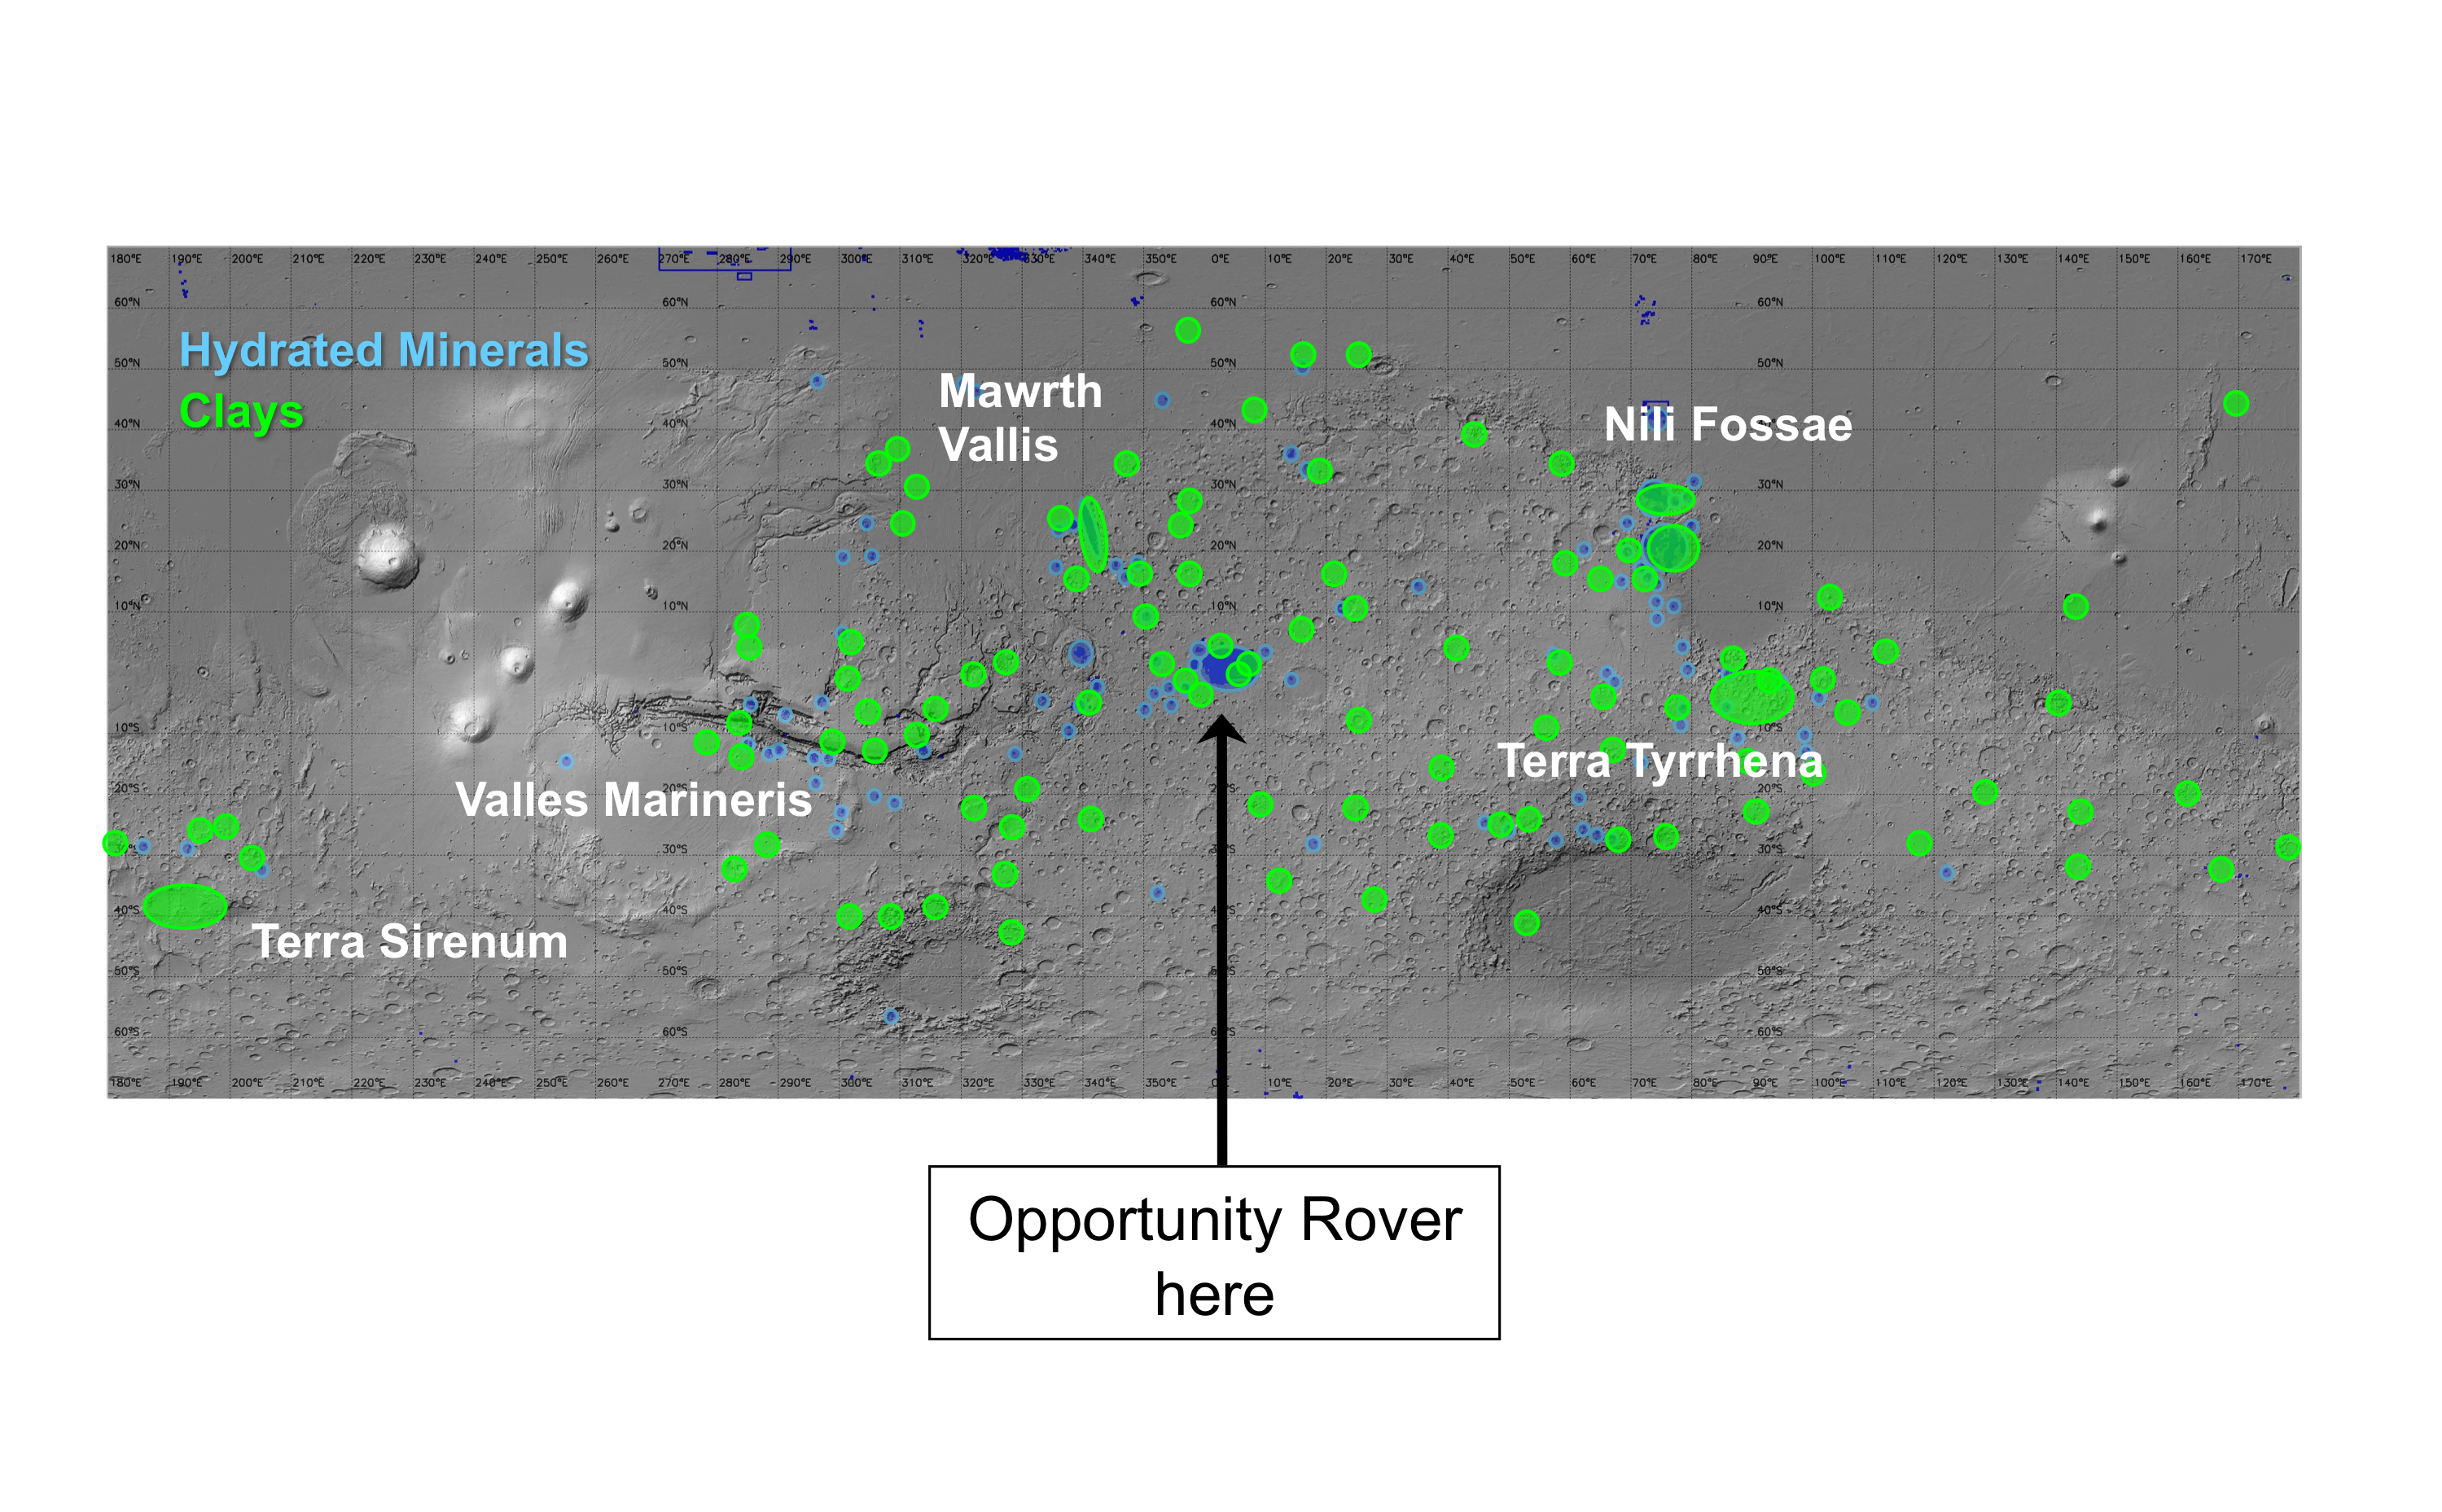 Regions of Mars with Clays and Hydrated Minerals Identified from Orbit